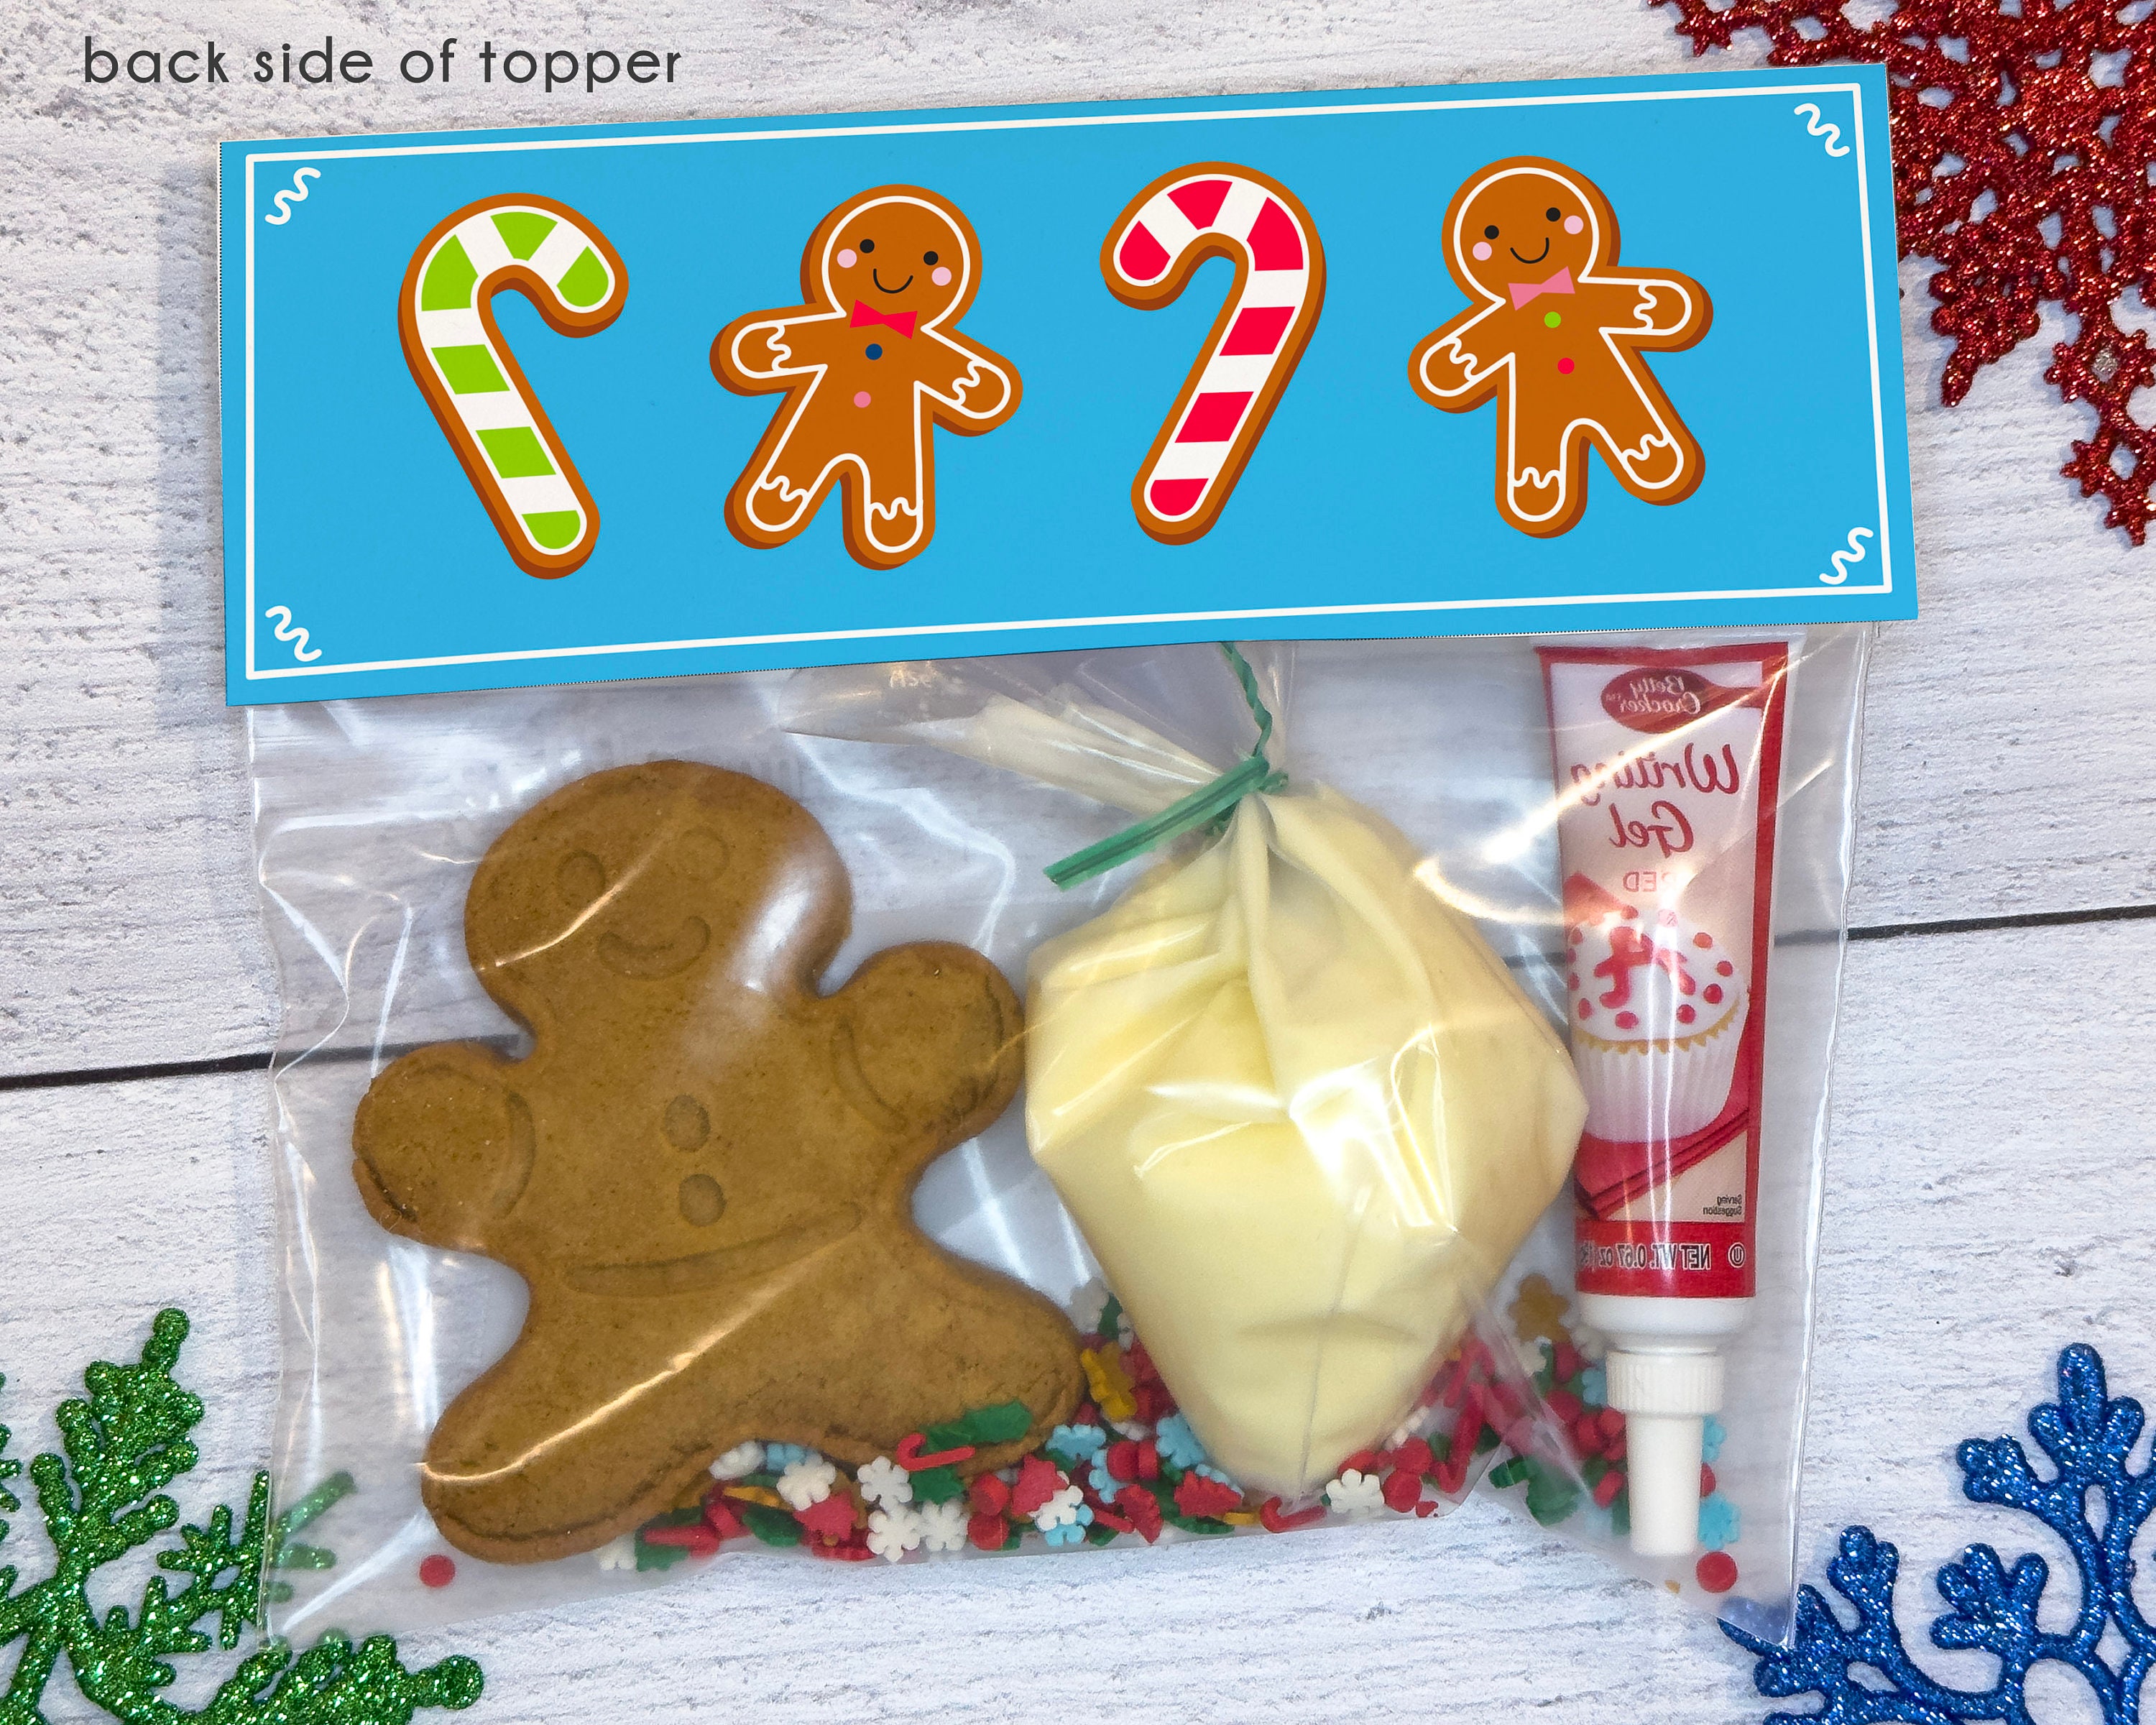 Printable Treat Topper for a Build Your Own Snowman Activity Kit